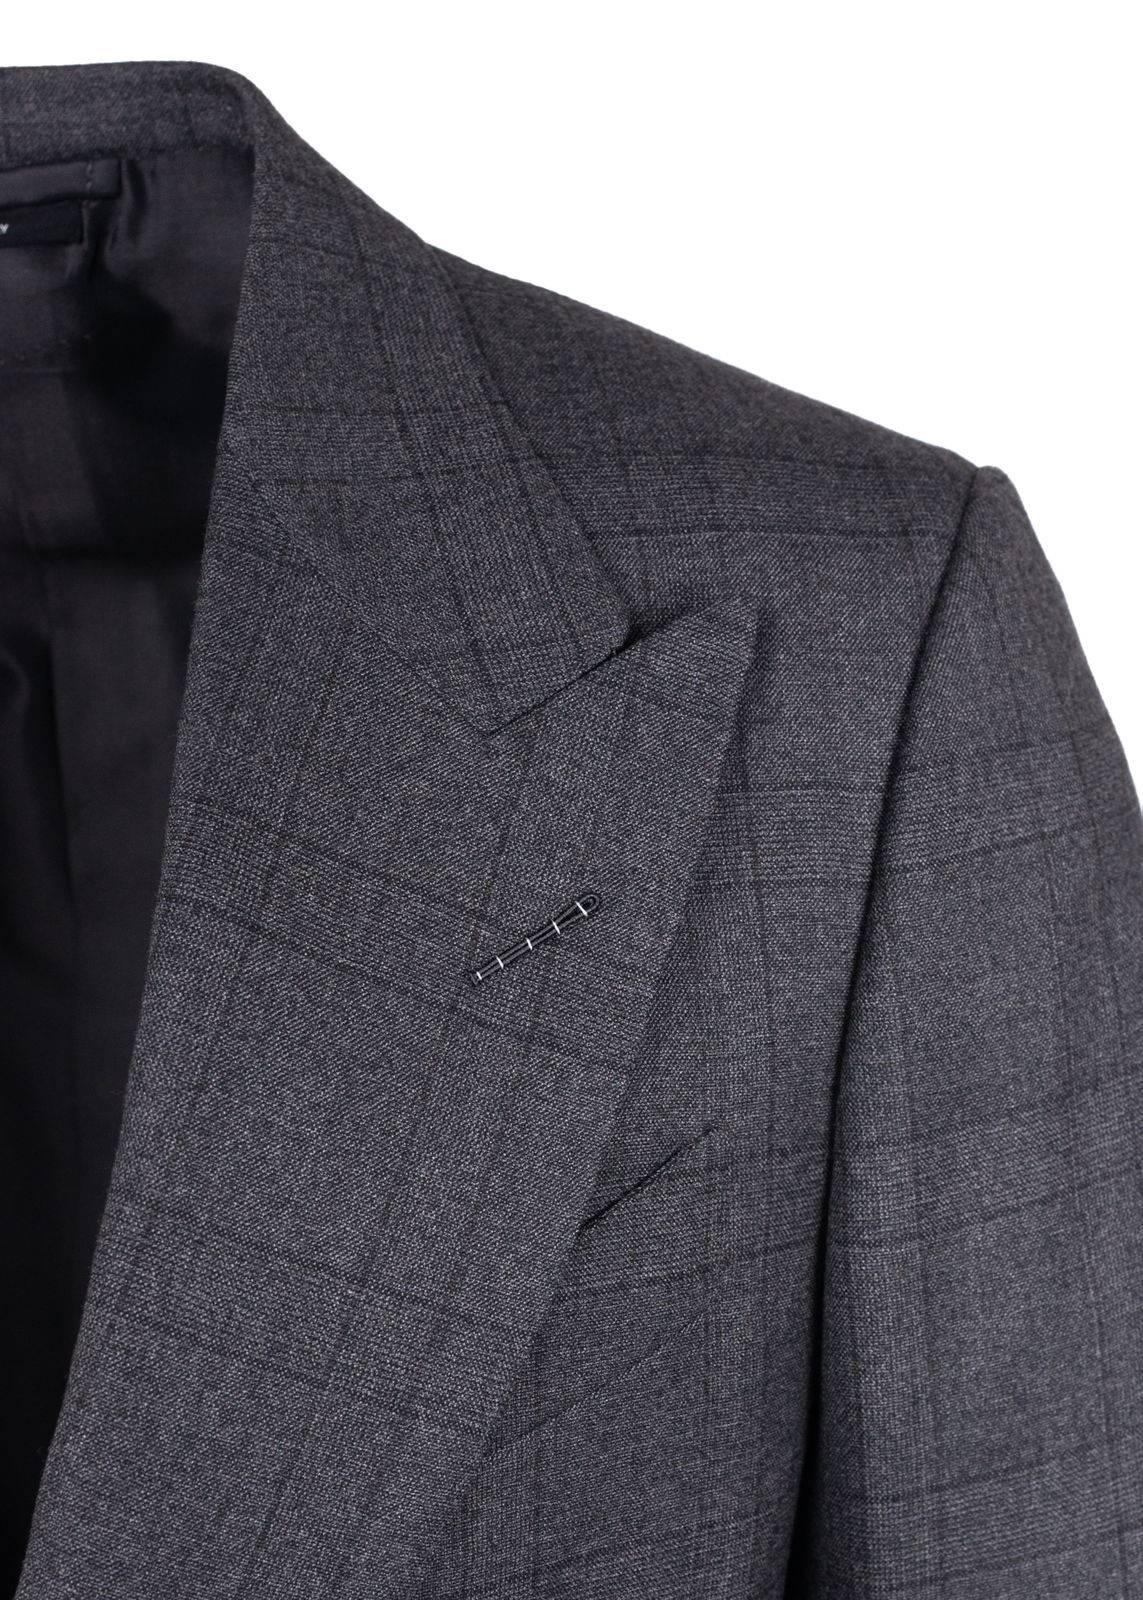 Tom Ford adds an elegant twist to his classic silhouette suit. Crafted of high quality pure wool this suit features an all over grey tone check pattern with a center vent, wide peak lapel jacket and tapered pleated front trousers. This suit lends